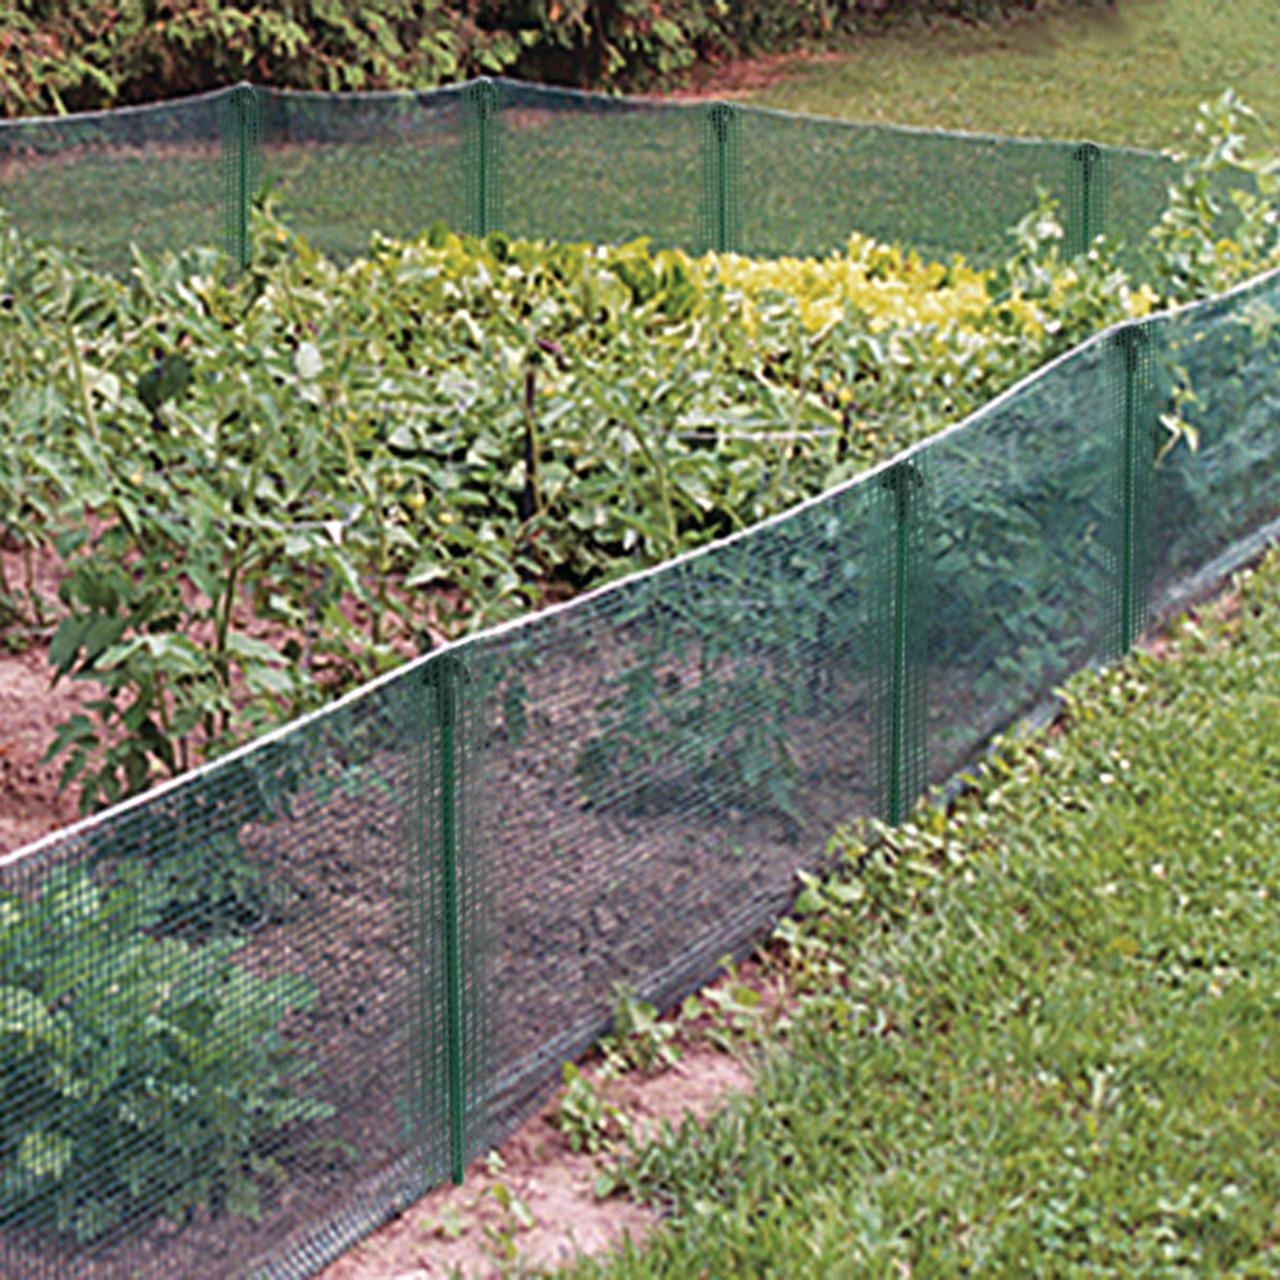 Safety Fence,Snow Fencing,Deer Netting,Mesh,Plastic Barrier for Garden 47"x98' 